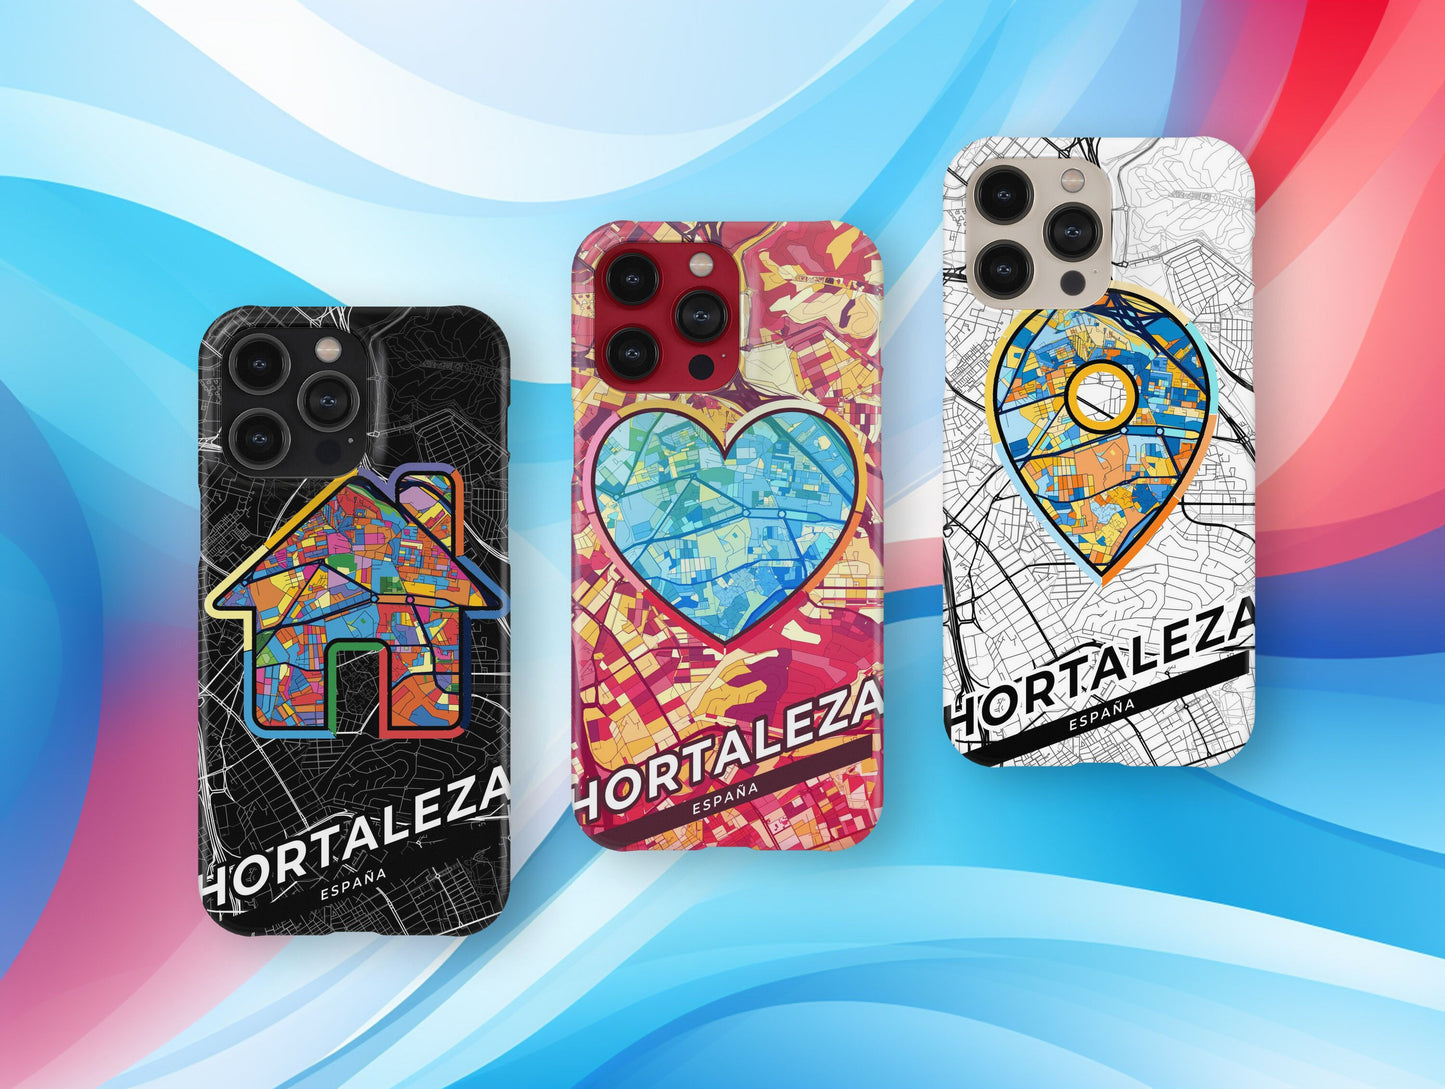 Hortaleza Spain slim phone case with colorful icon. Birthday, wedding or housewarming gift. Couple match cases.